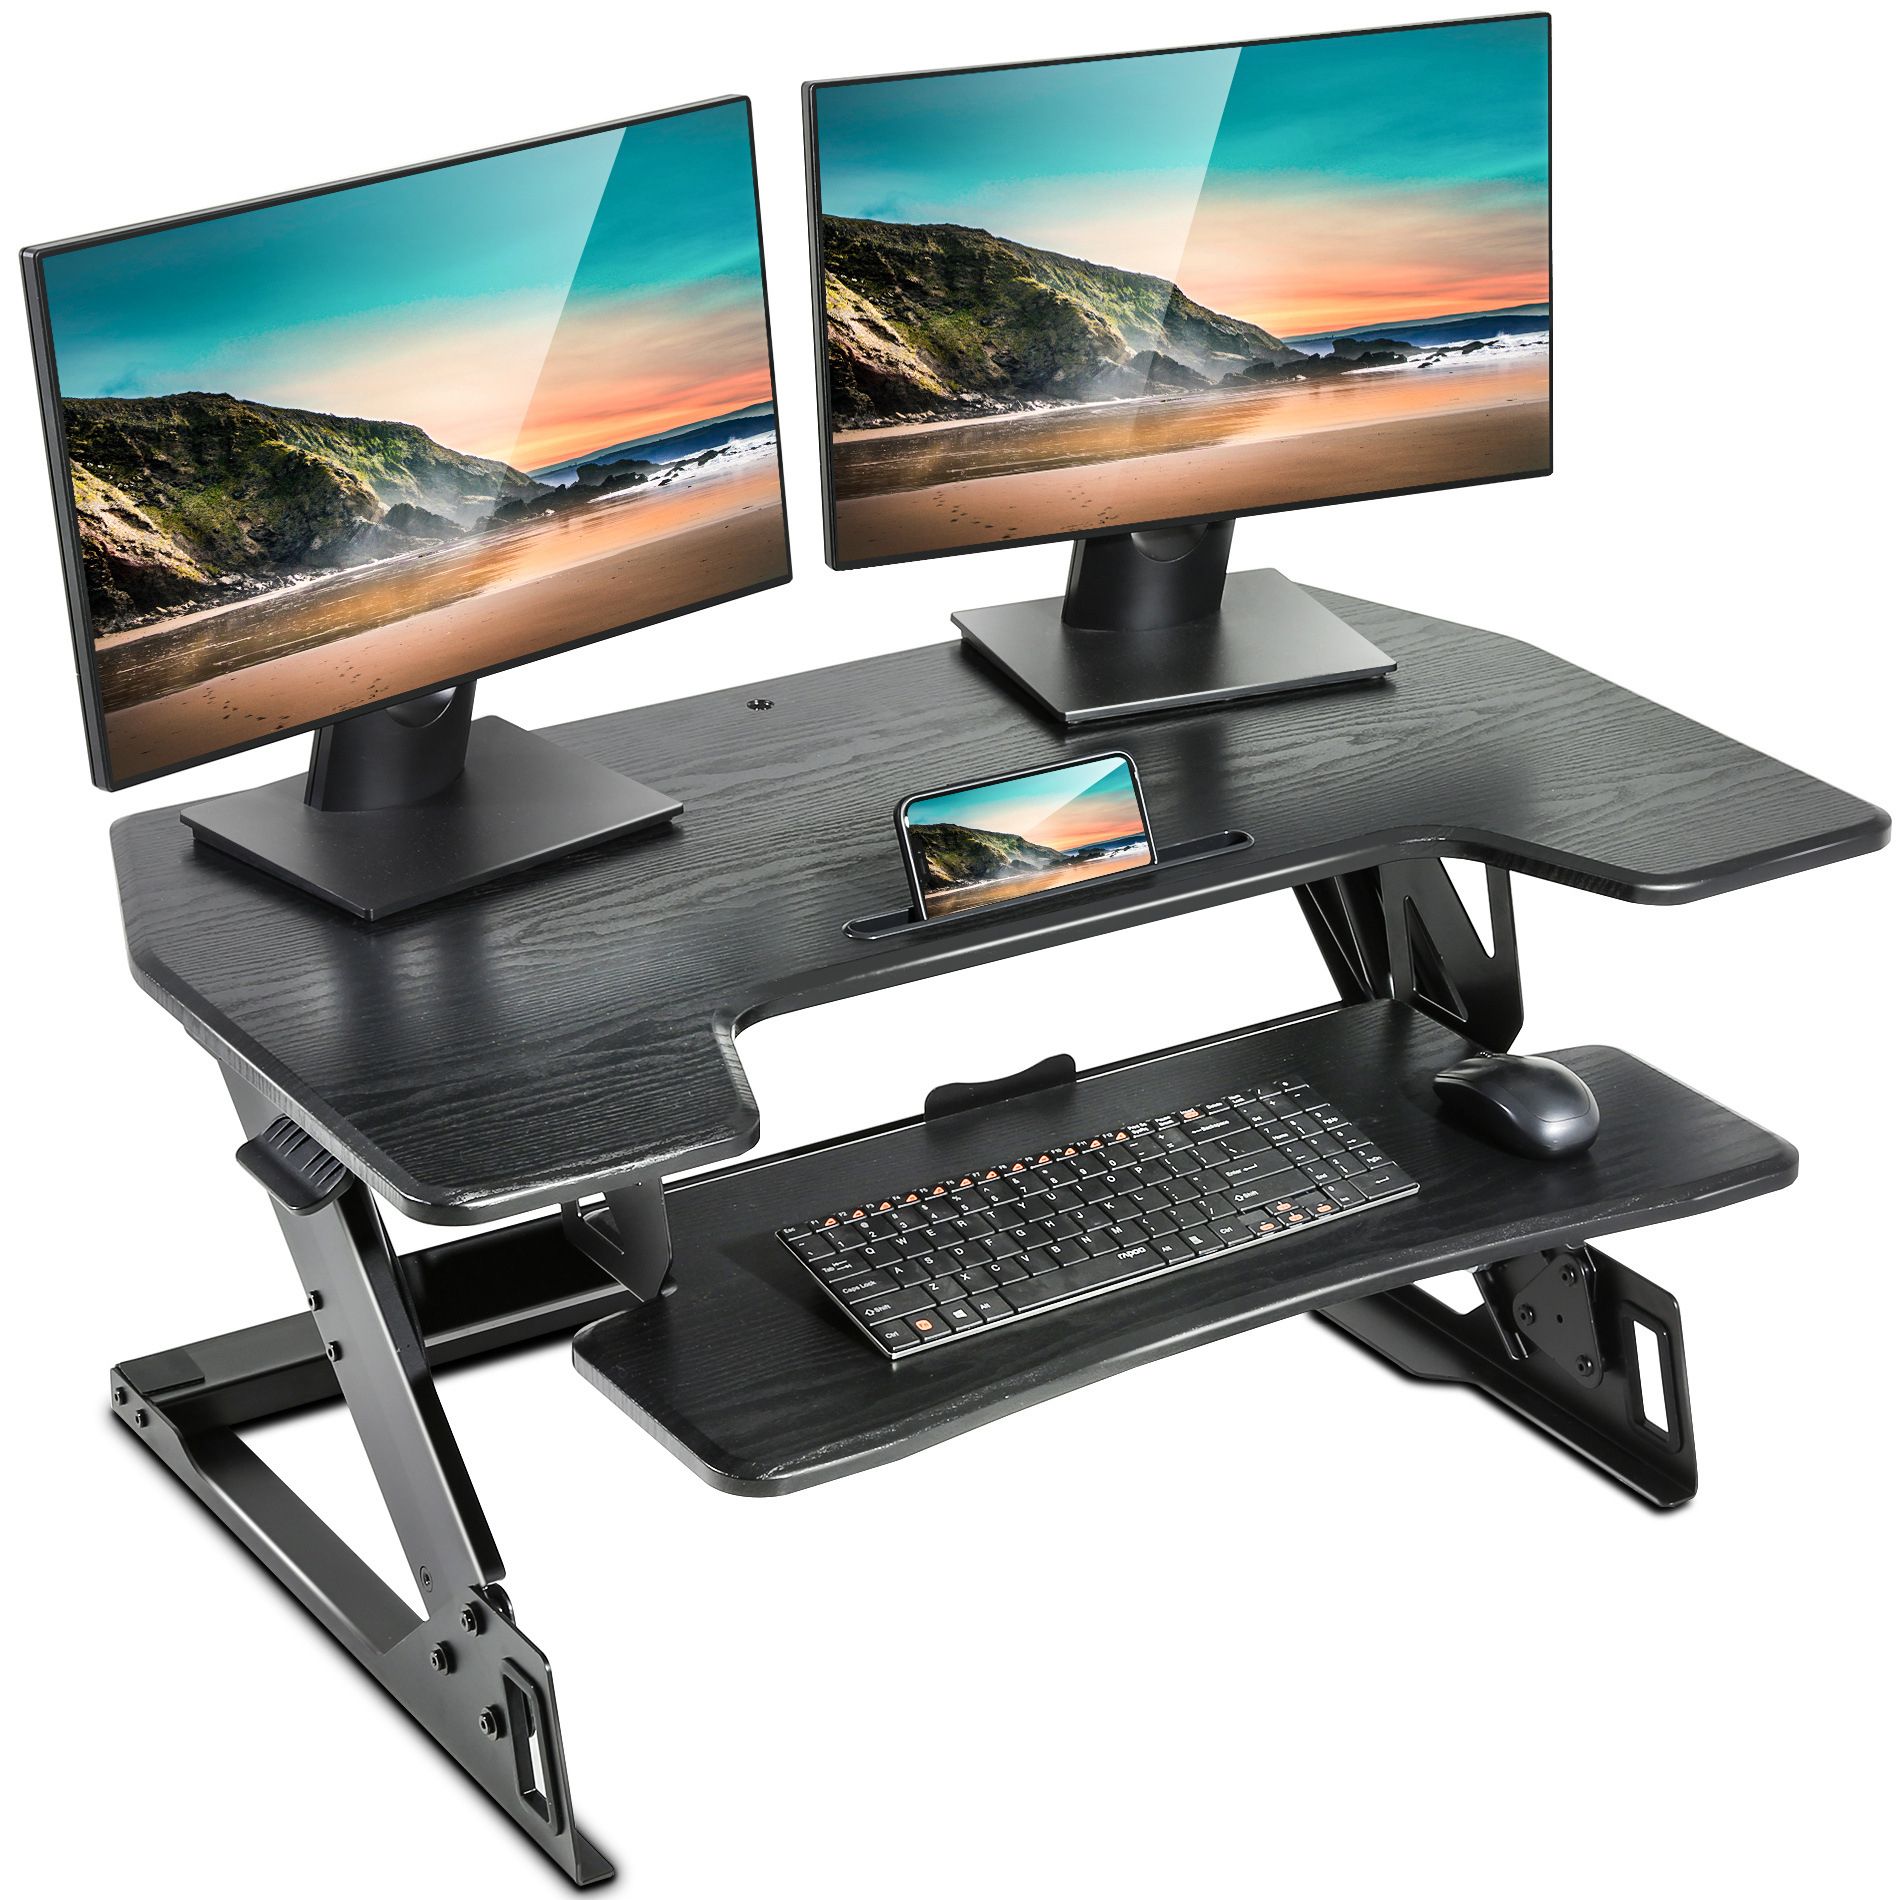 Fitueyes 36" Standing Desk Converter Sit To Stand Up Desk For Dual Throughout Espresso Adjustable Stand Up Desks (View 6 of 15)